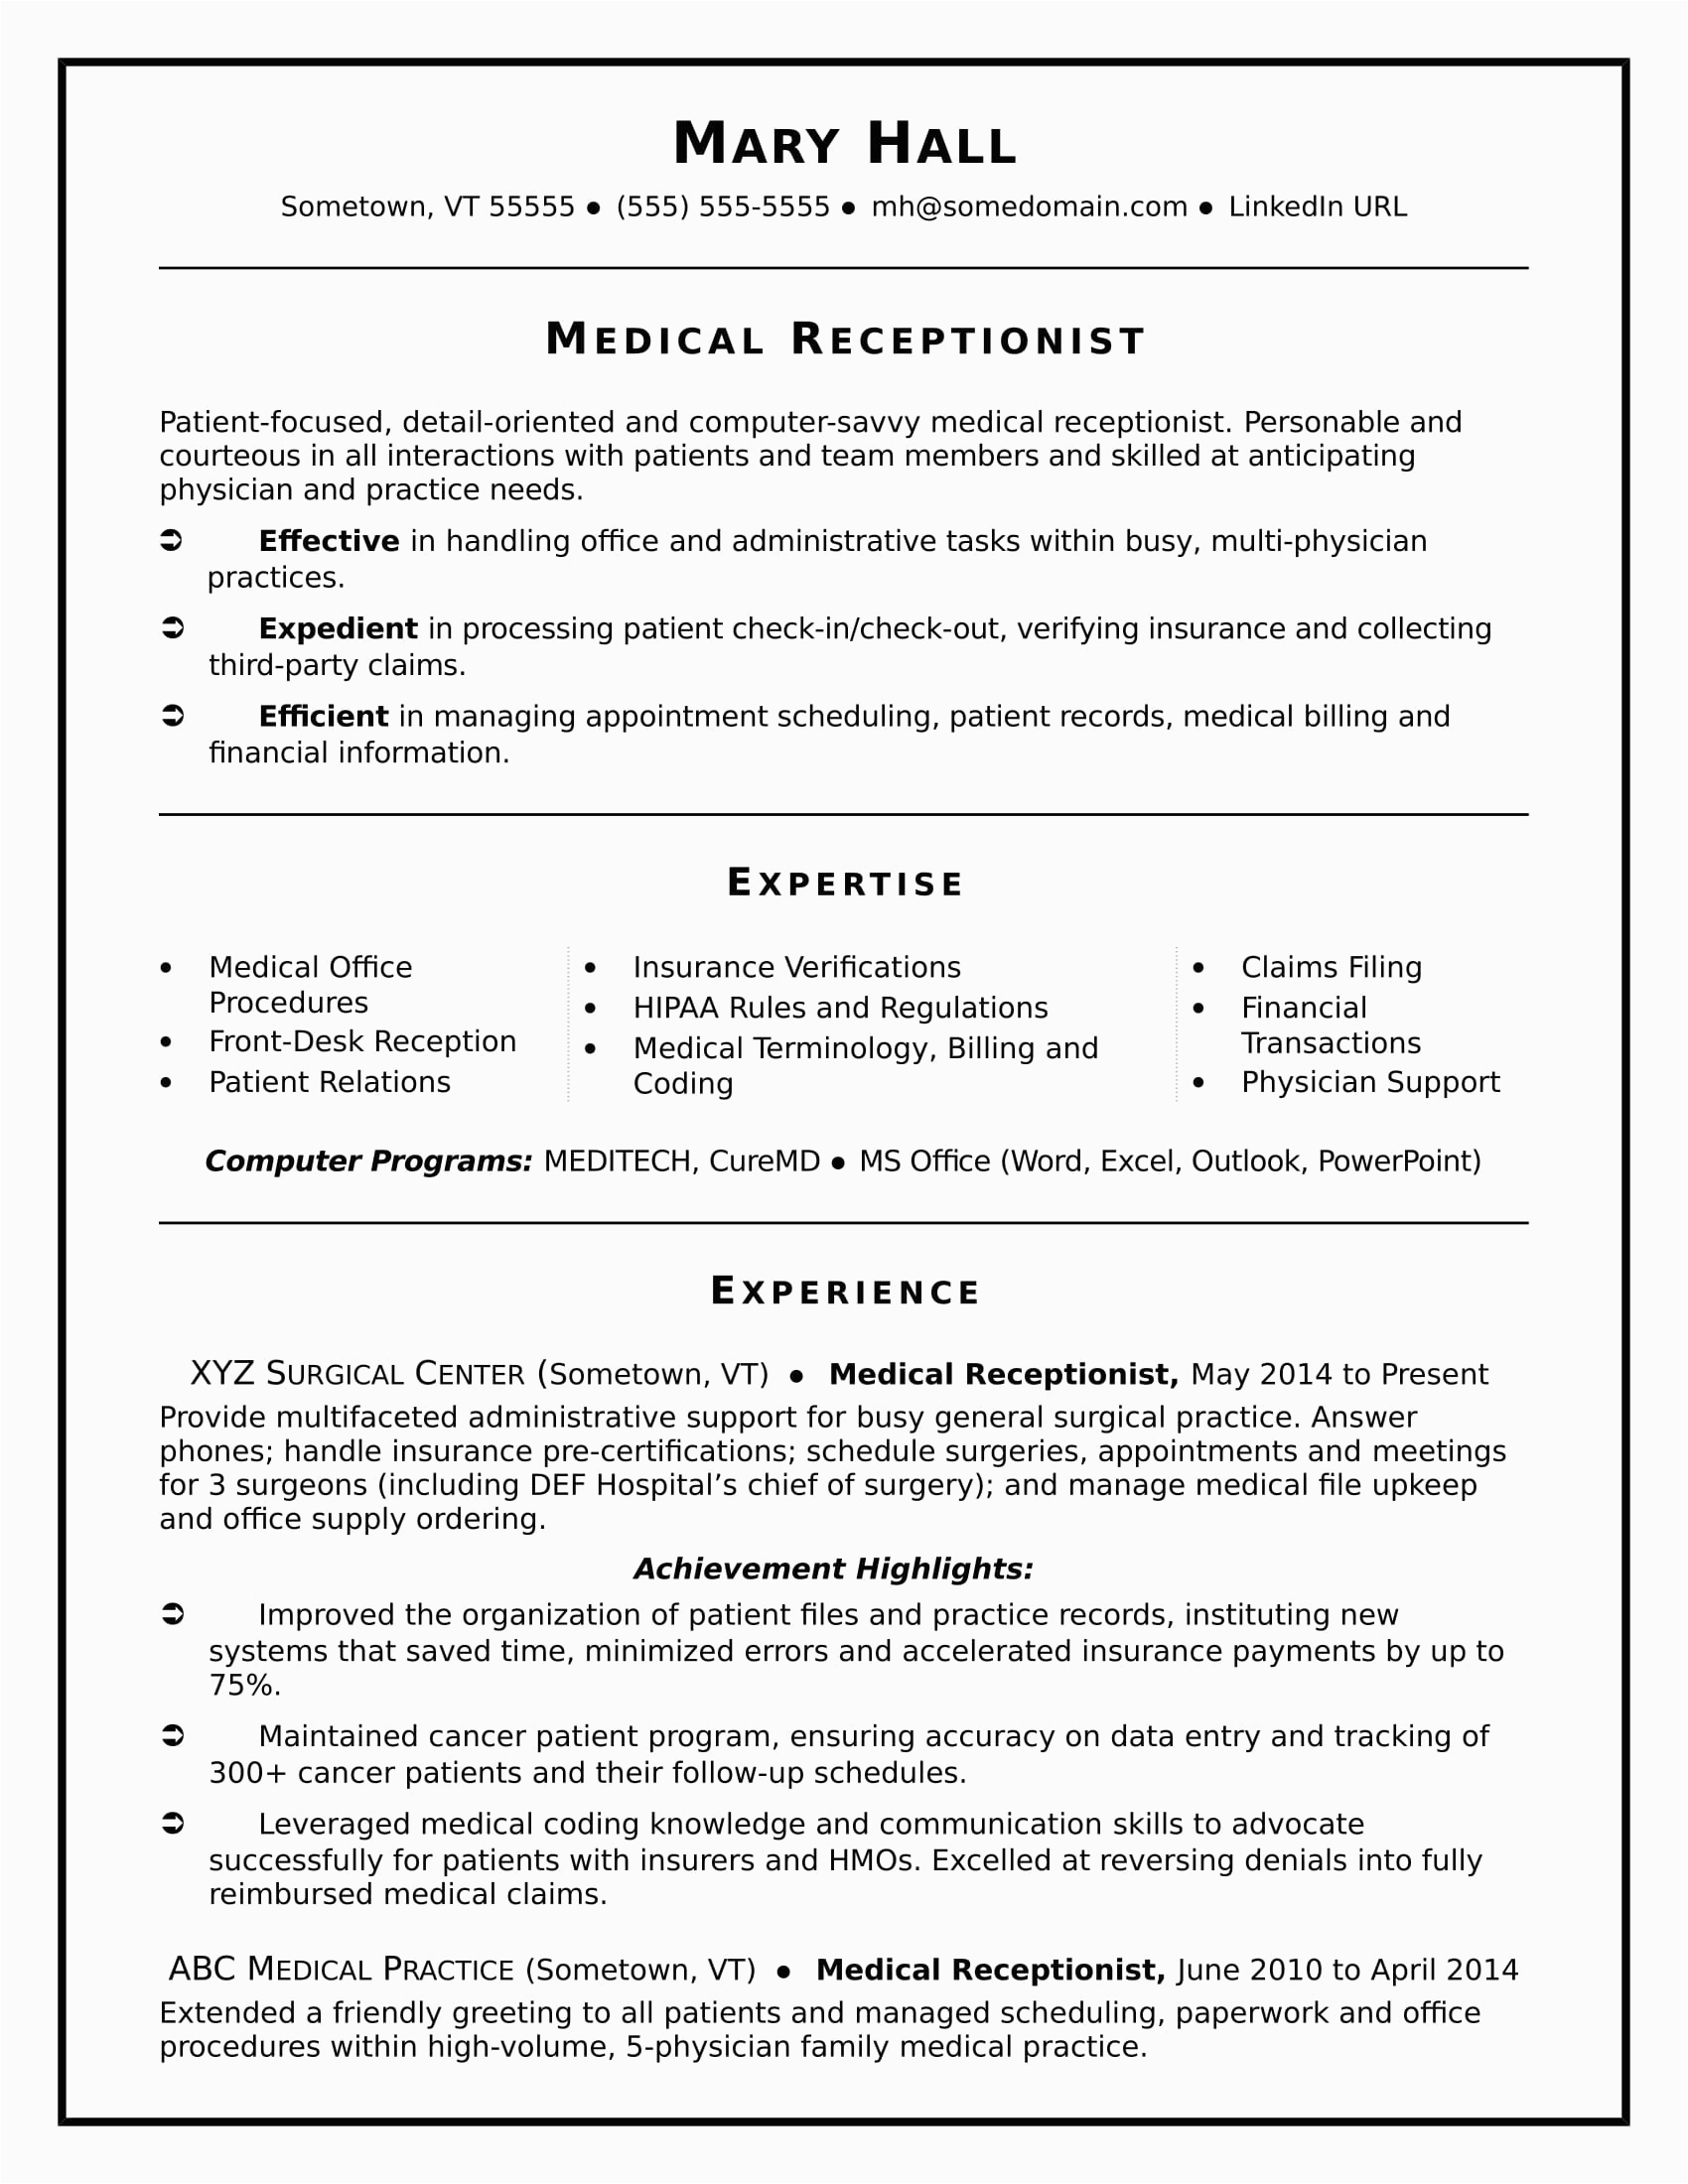 Office assistant and Receptionist Resume Objective Samples Receptionist Resume